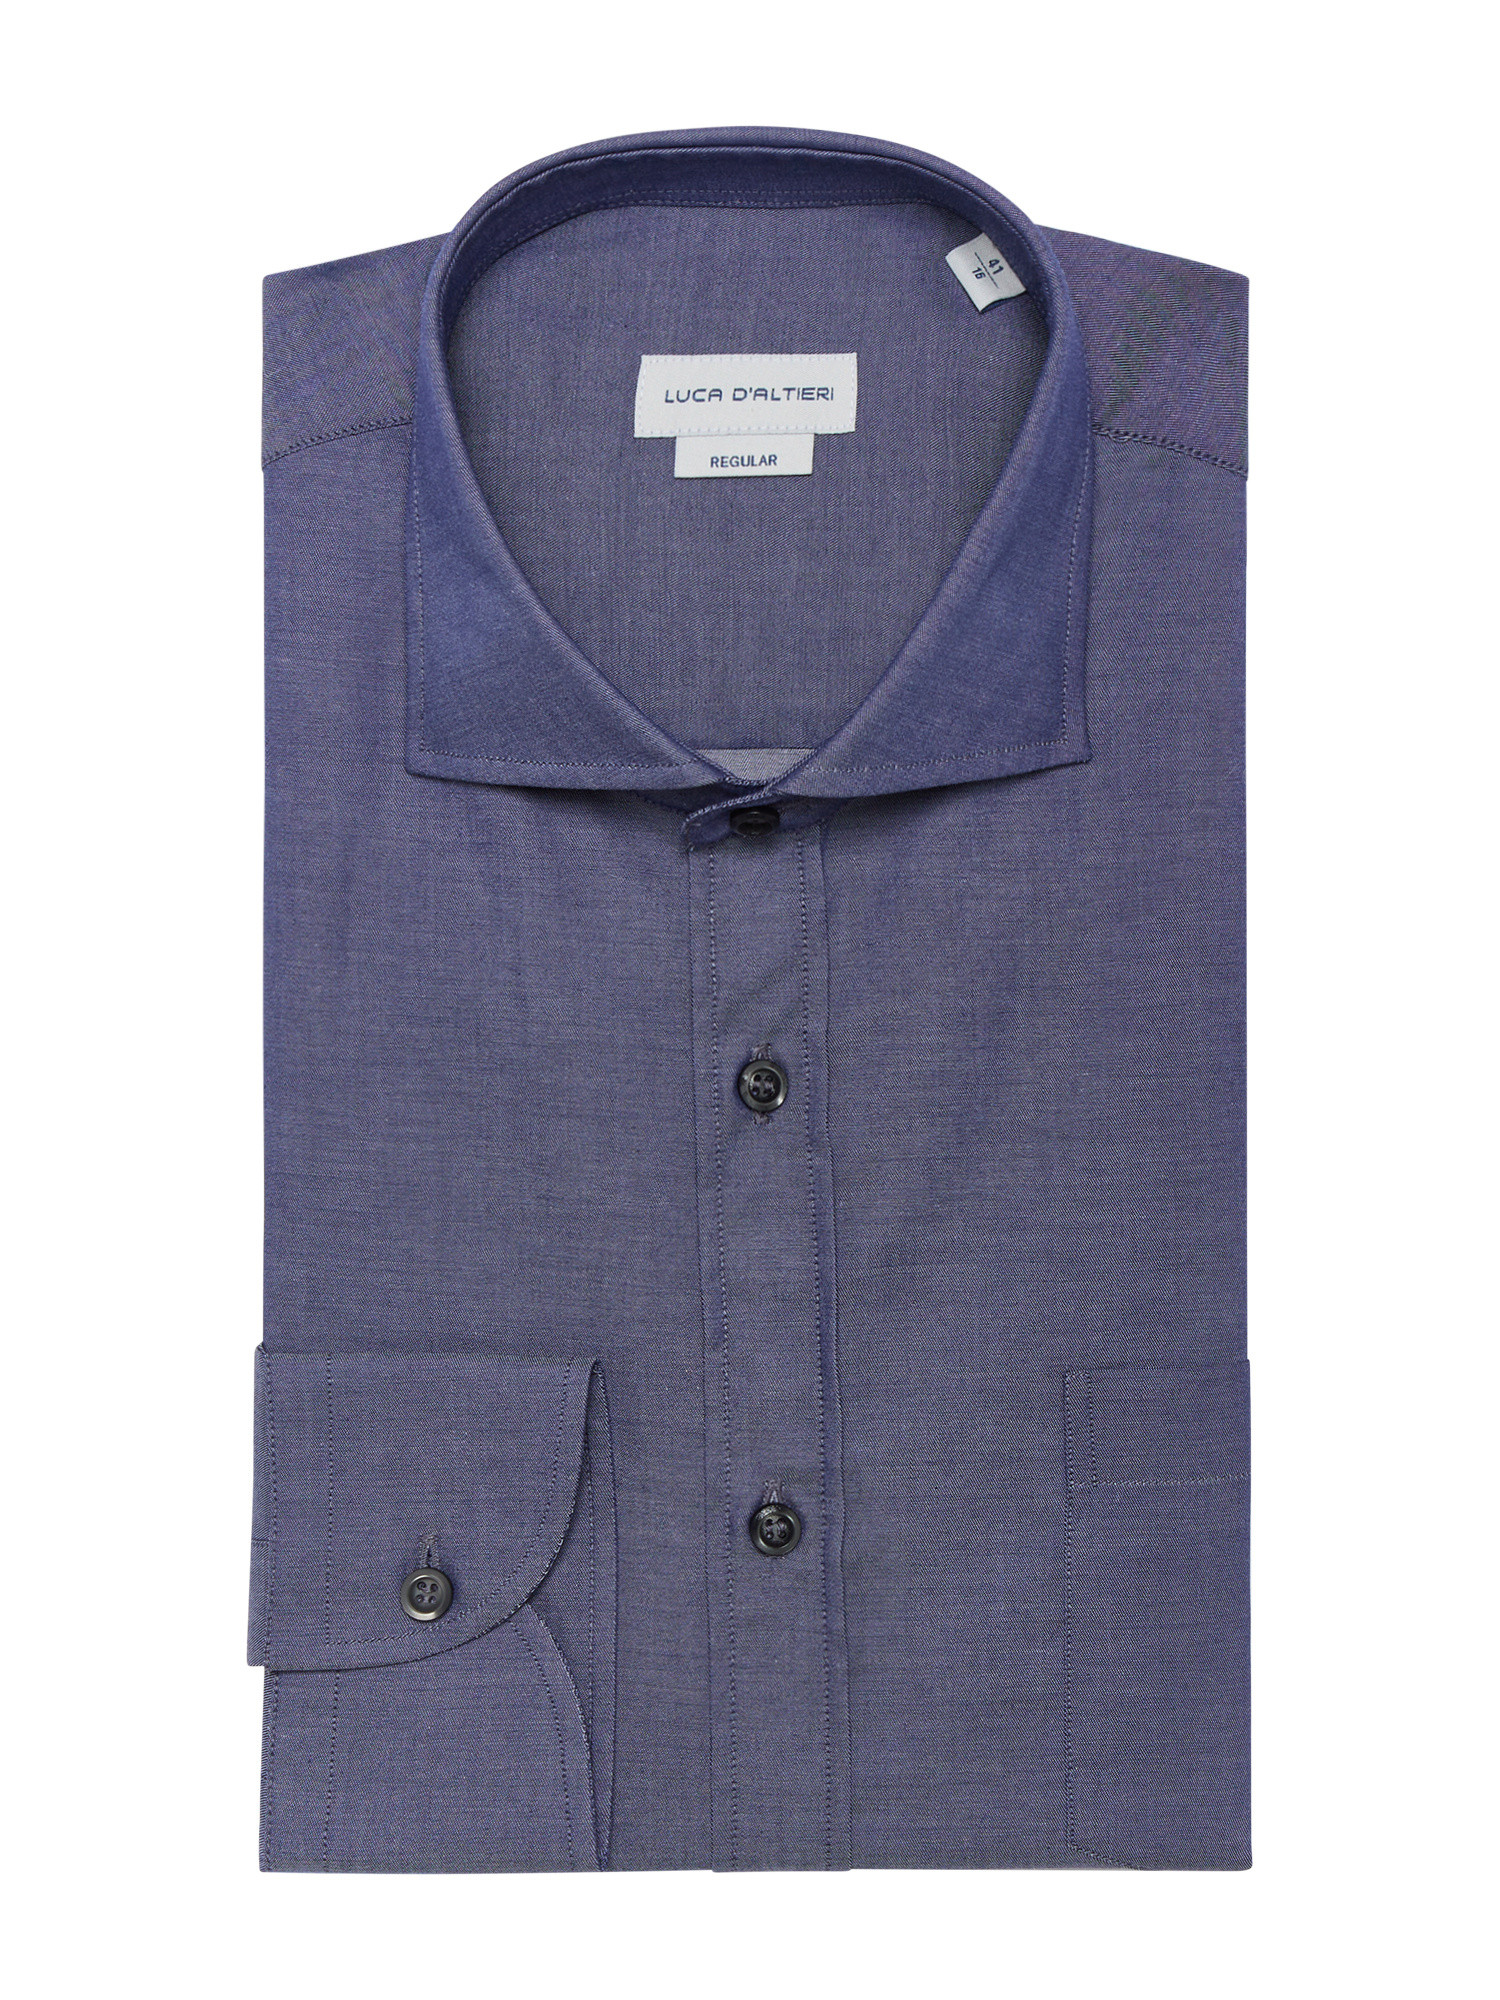 Luca D'Altieri - Regular fit casual shirt in pure cotton twill, Blue, large image number 0